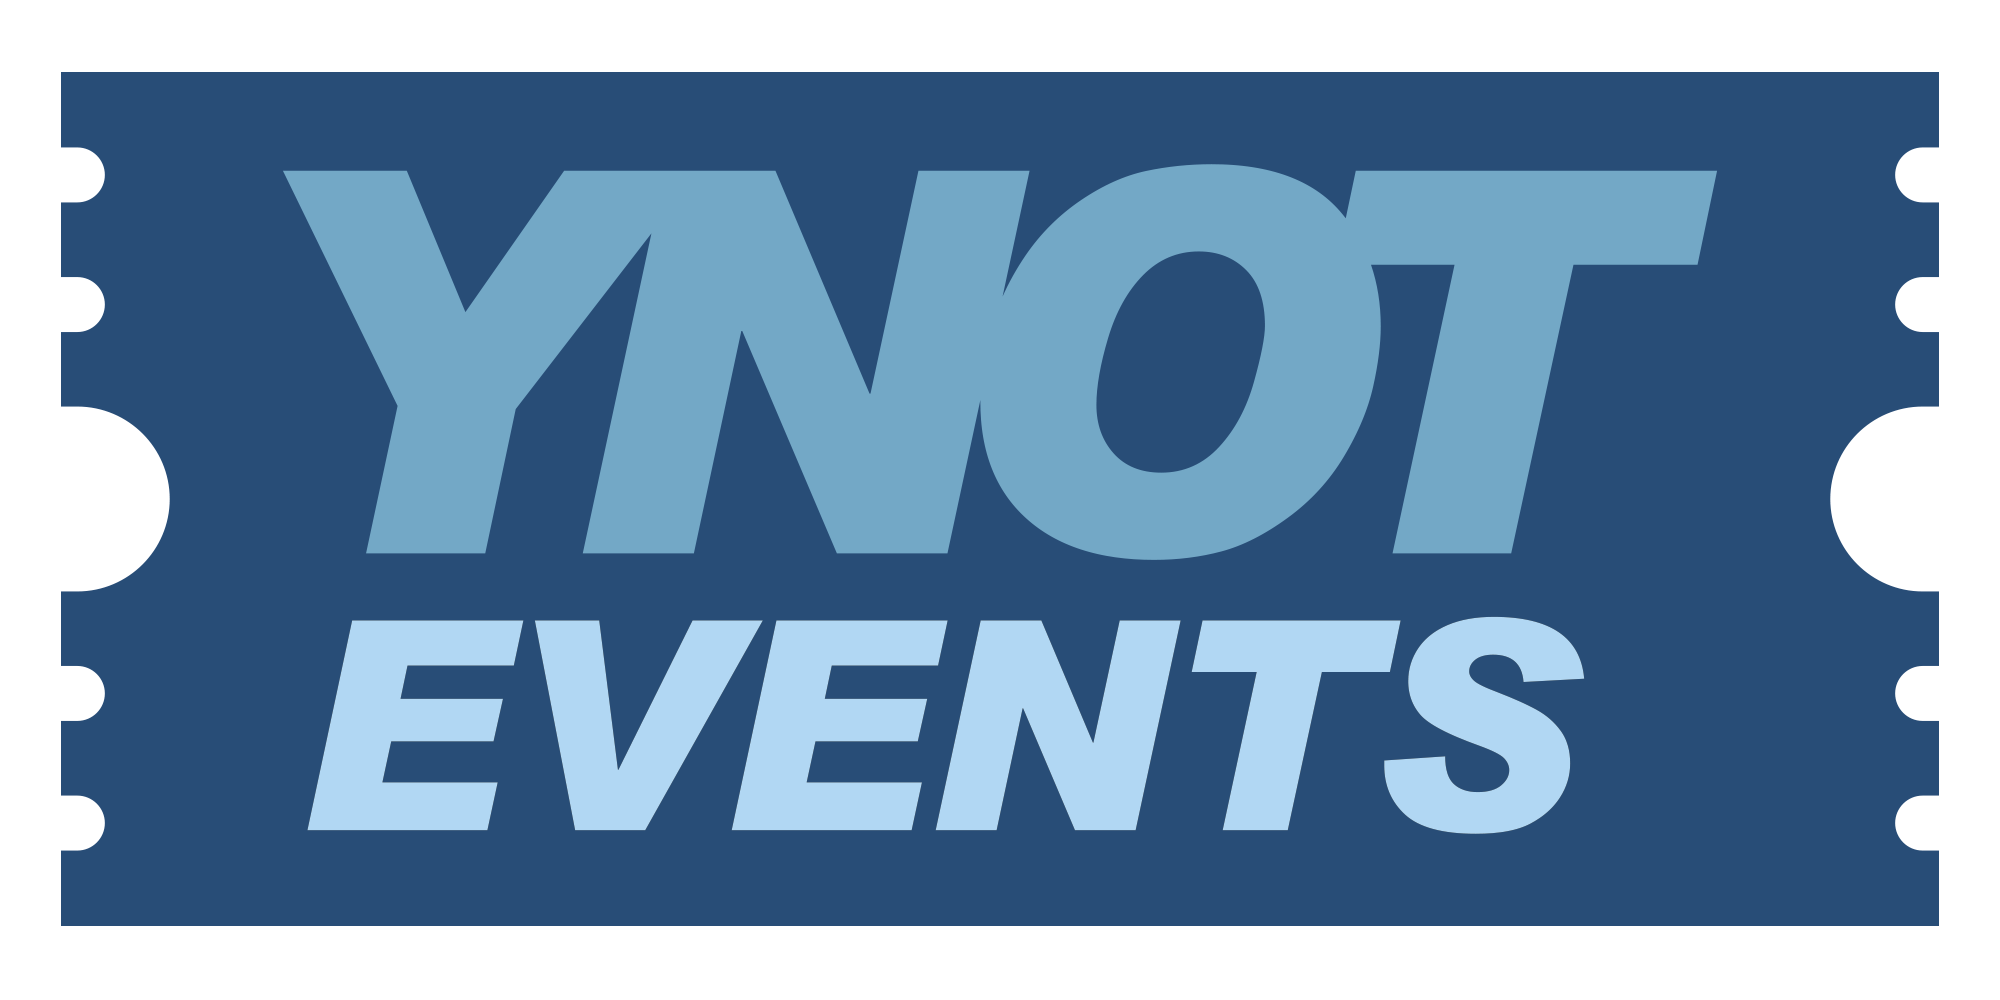 YNOT Events